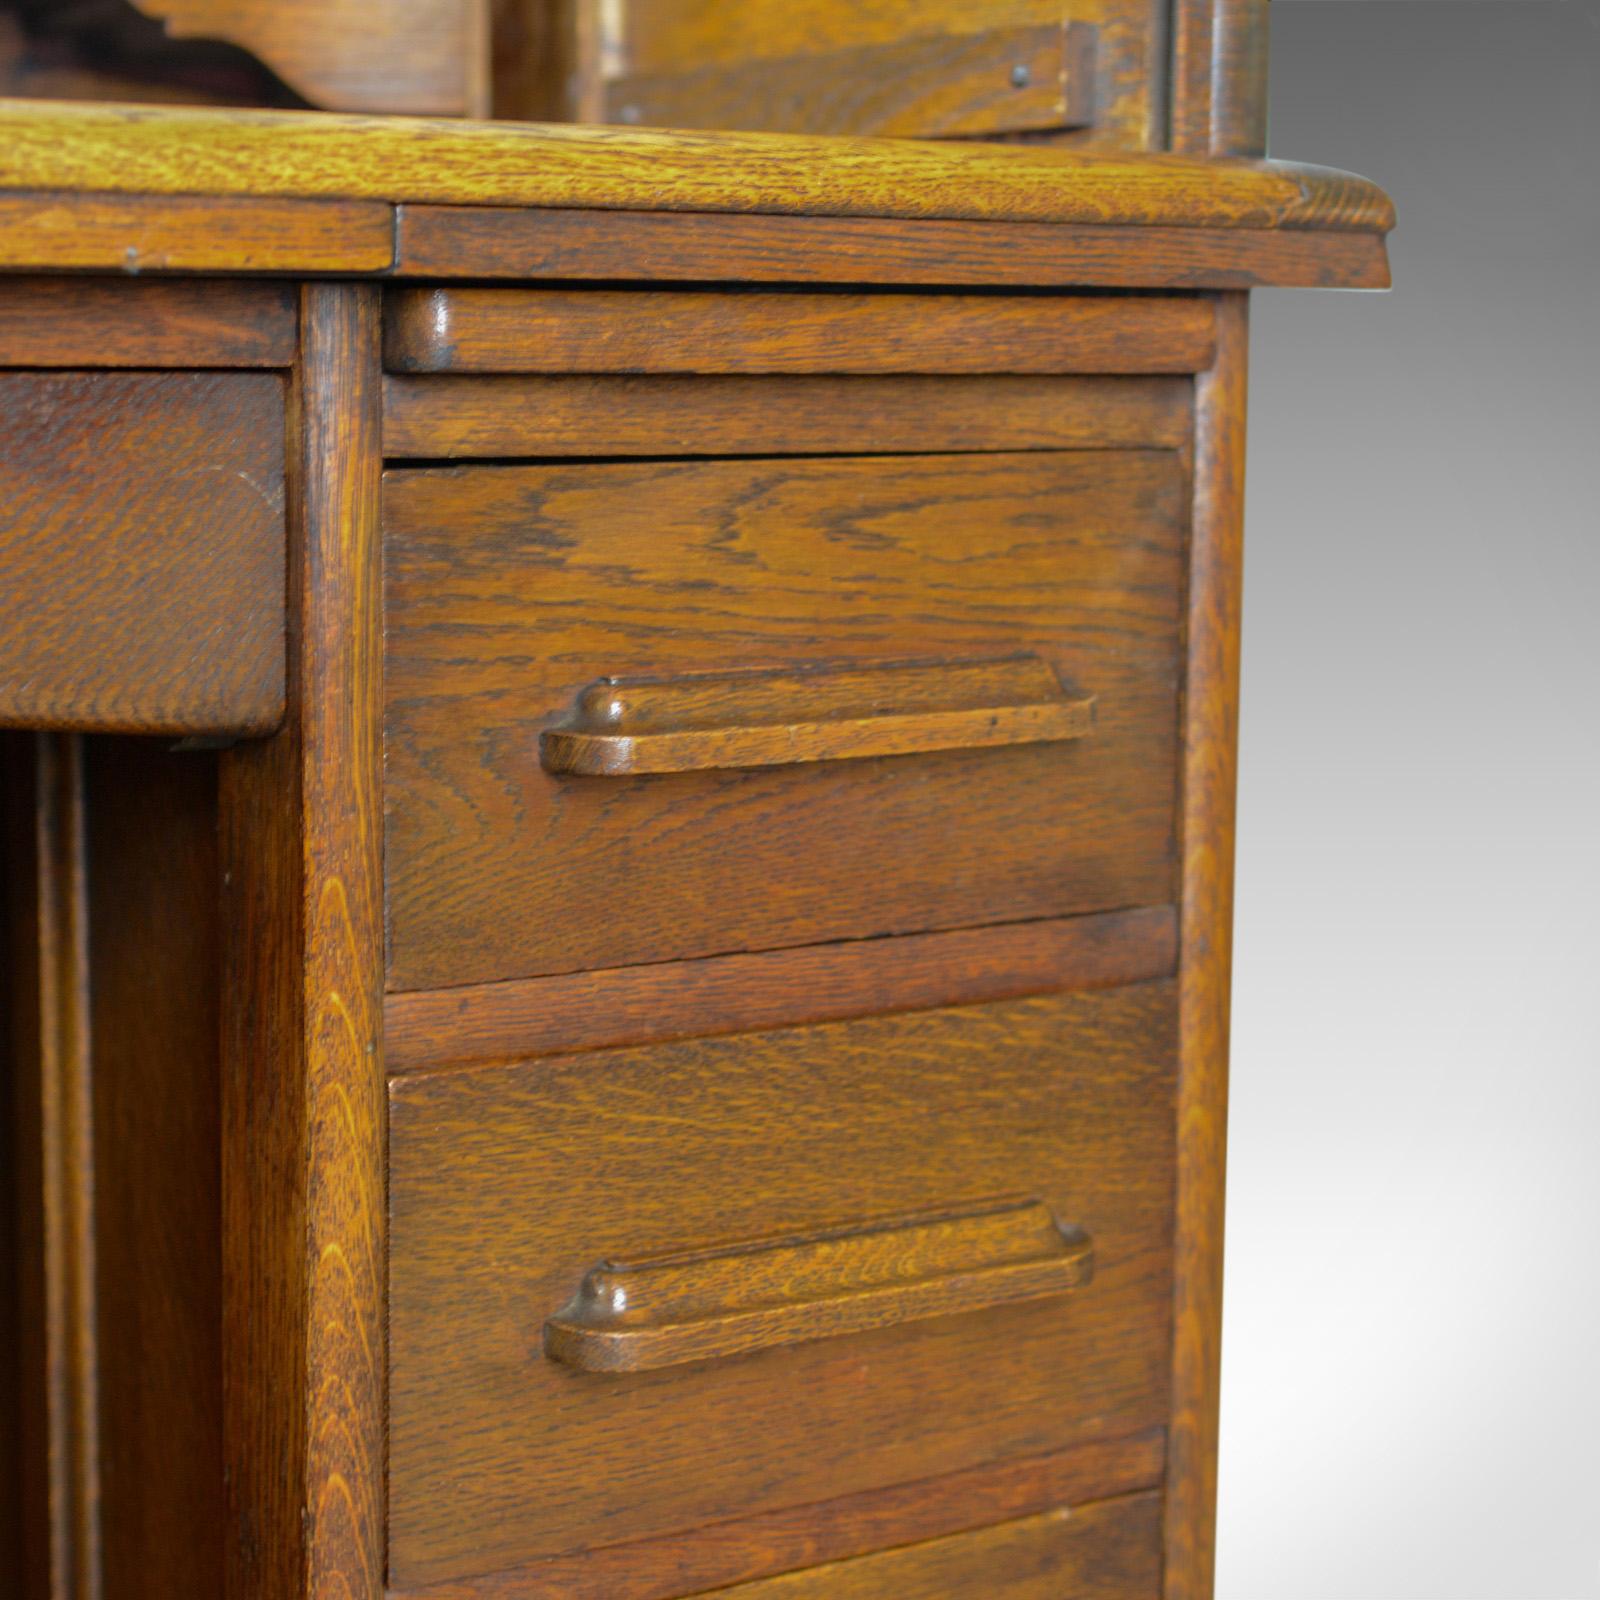 Small Antique Roll Top Desk, Oak, Tambour, William Angus and Co Ltd London 1